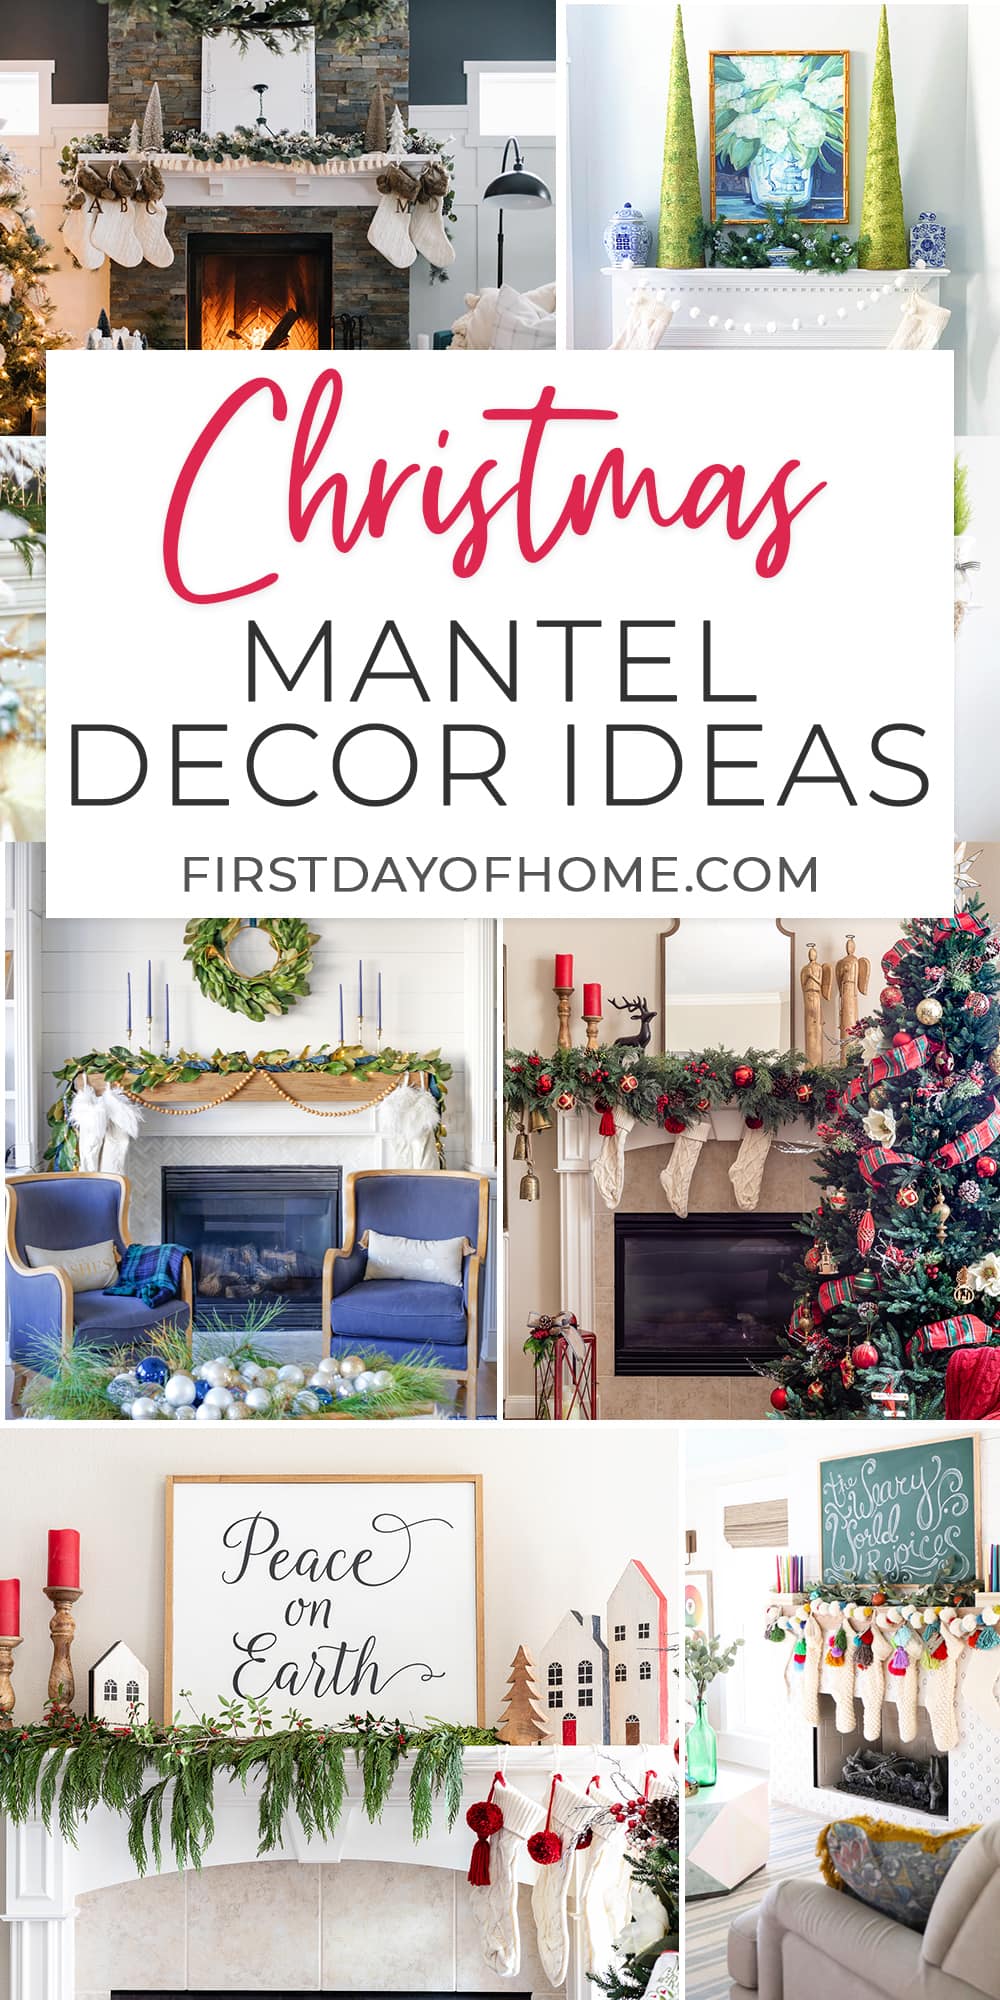 Collage of Christmas mantel decor with text overlay reading "Christmas Mantel Decor Ideas"